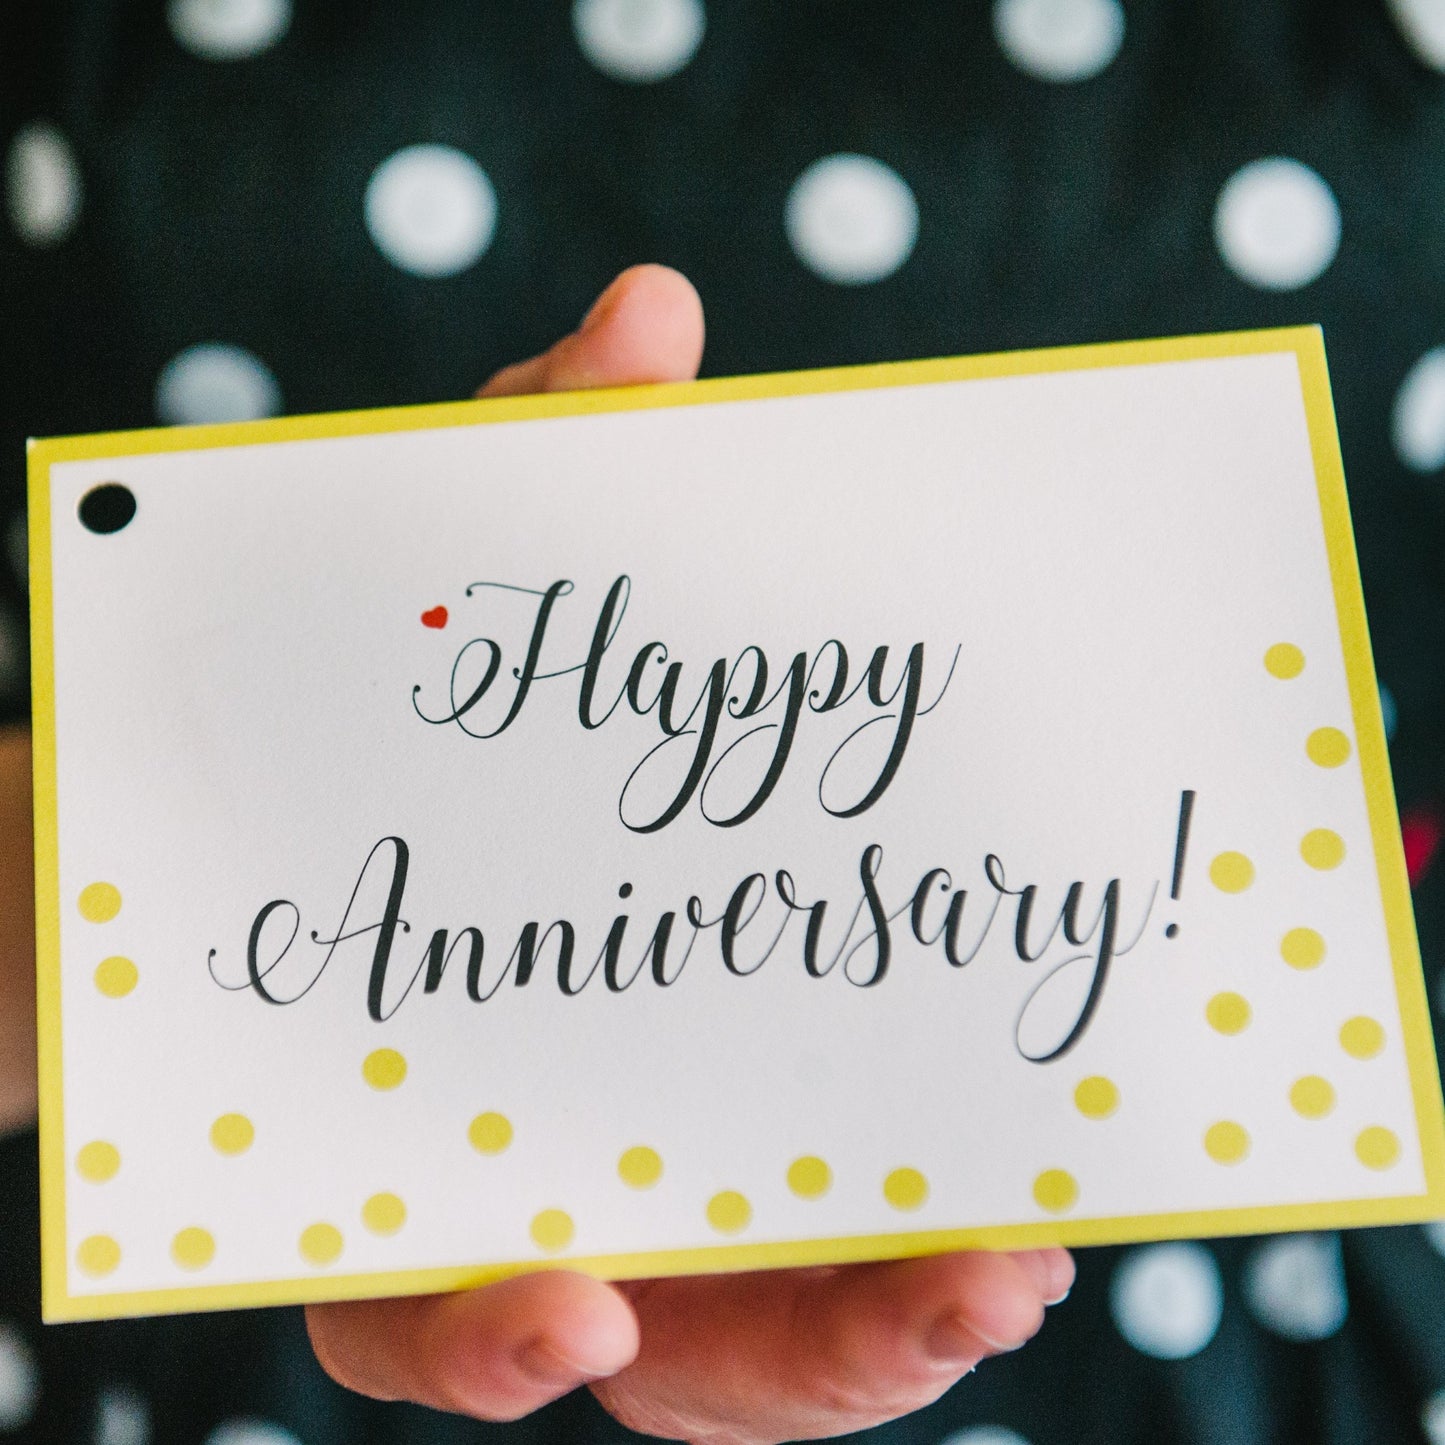 Happy Anniversary - Macarons, croissants & cakes and other pastries in this French dessert bakery at Yann Haute Patisserie, 329 23 Avenue southwest, Calgary